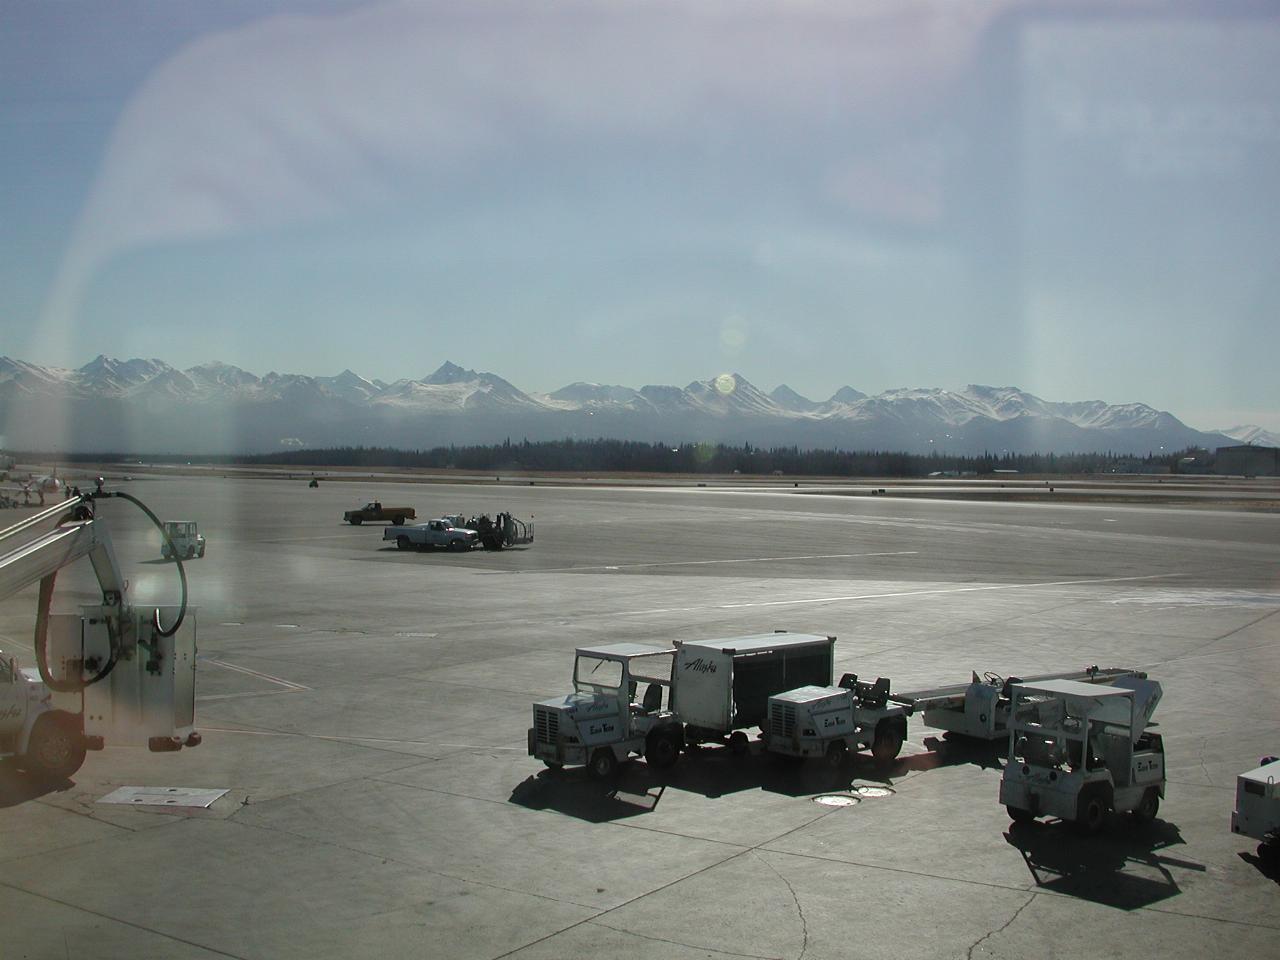 Anchorage Airport's mountain views